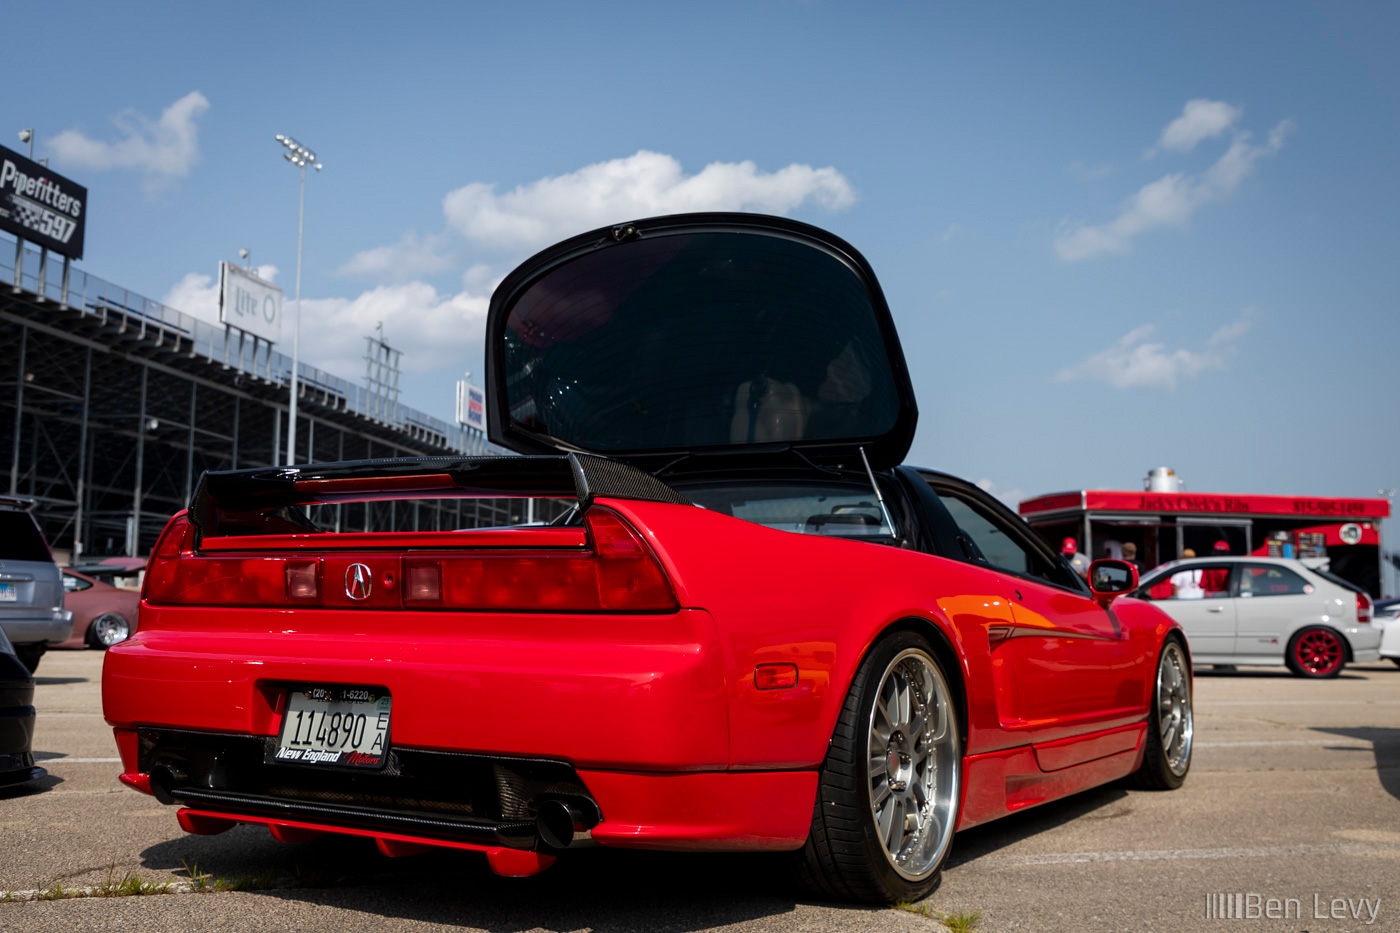 Rear Quarter of Red Acura NSX